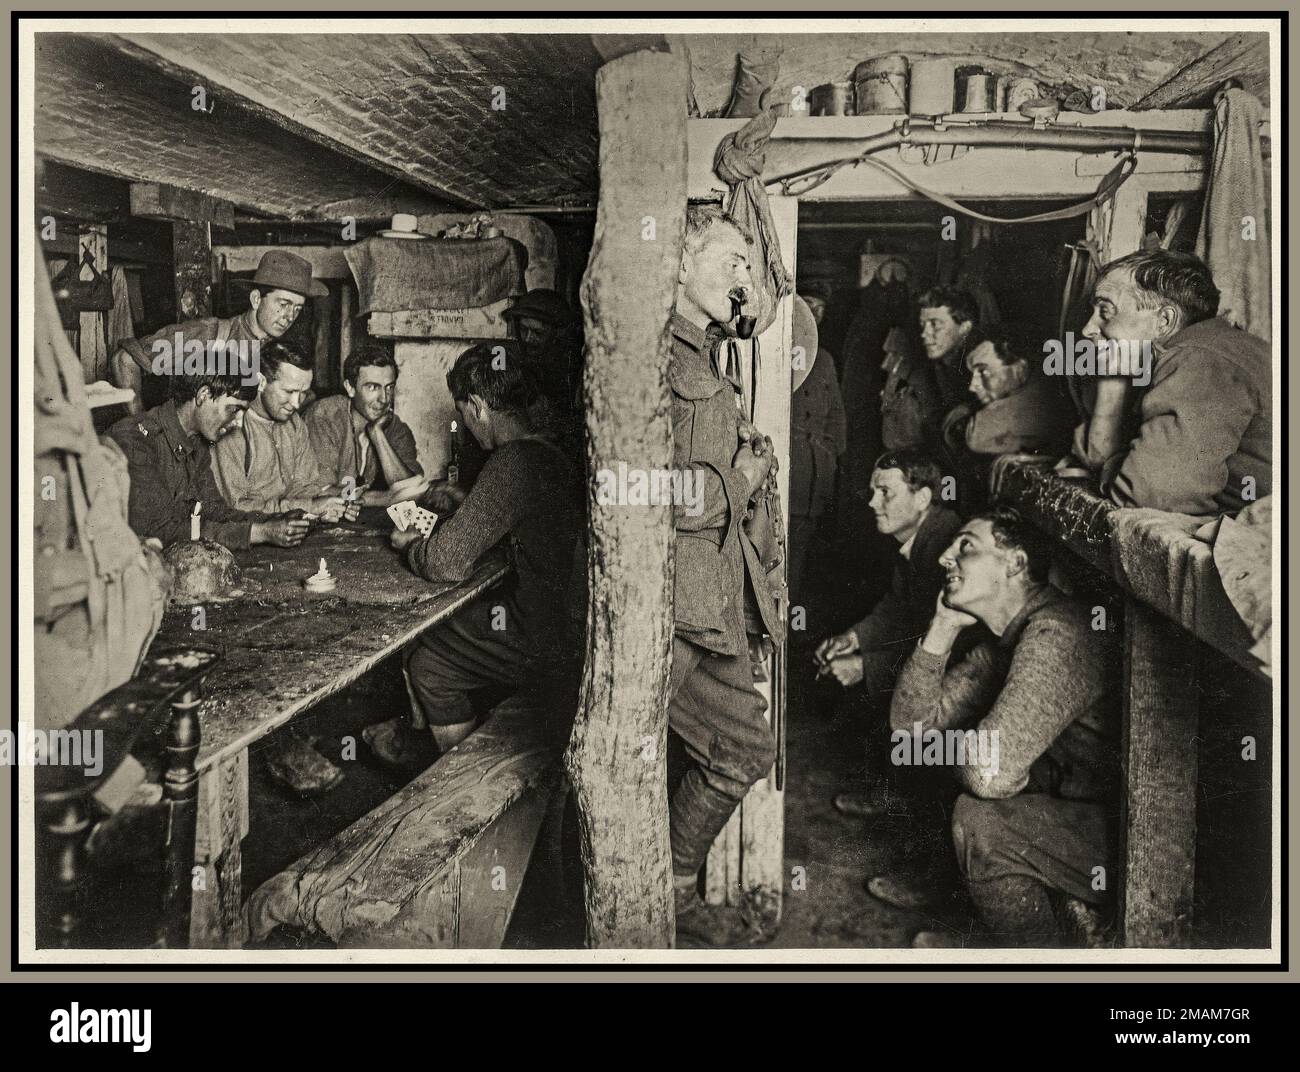 WW1 1915 Propaganda image 'Safe from the shells' - Canadian soldiers playing cards in dug-out shelter in the trenches (probably The Somme), at The Front in France during World War 1 Stock Photo